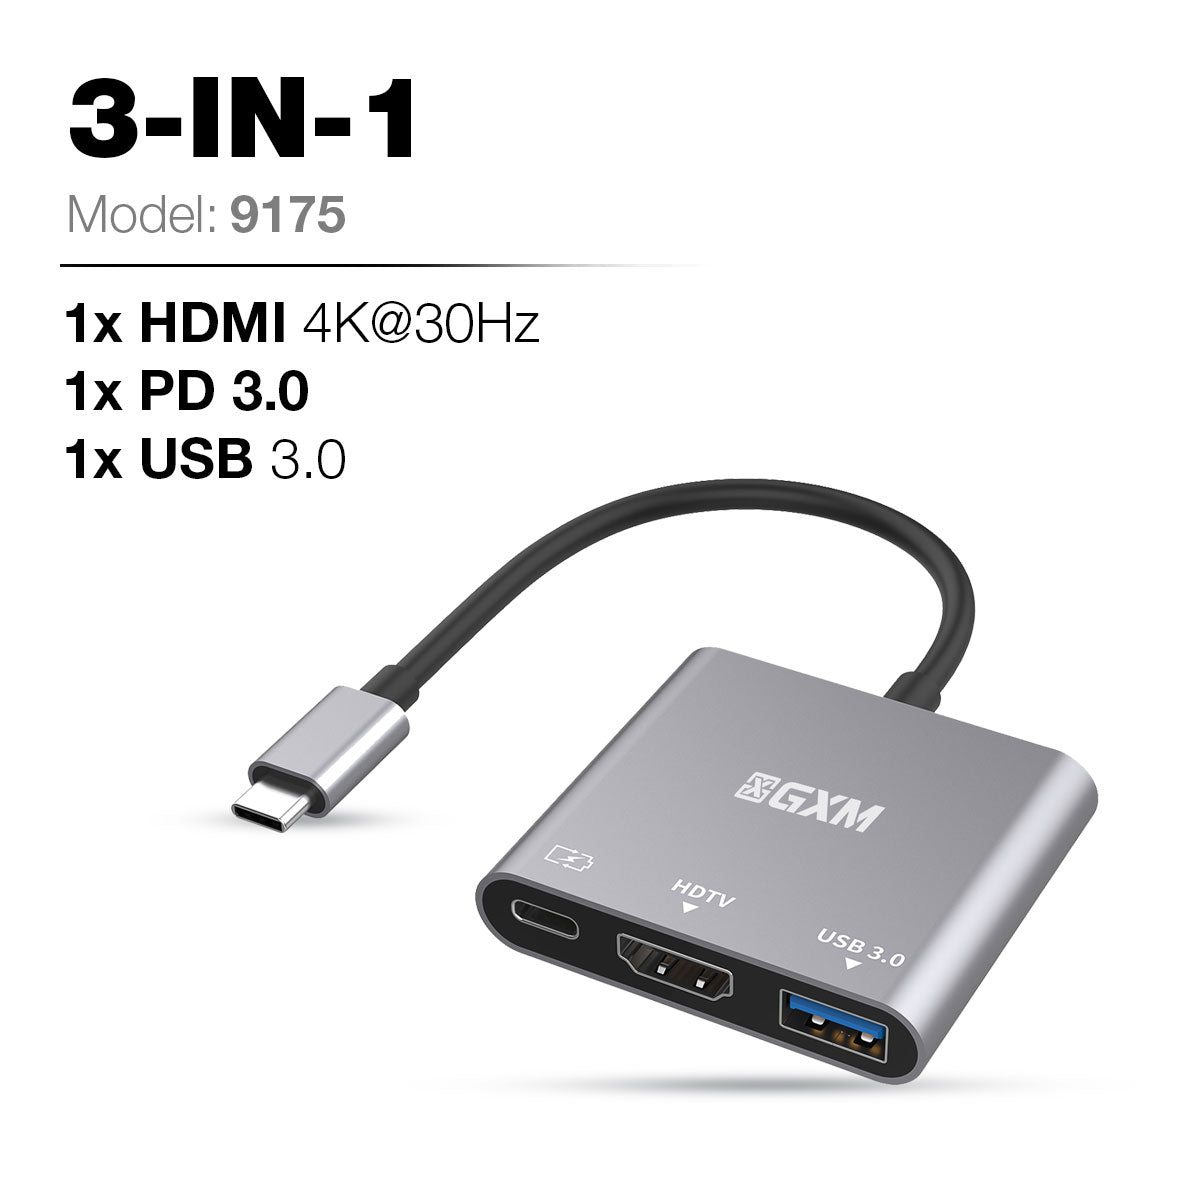 GXM 3 IN 1 Type-C to HDMI Adapter HDMI PD Charging USB Laptop Mobile Phone Hub 9175